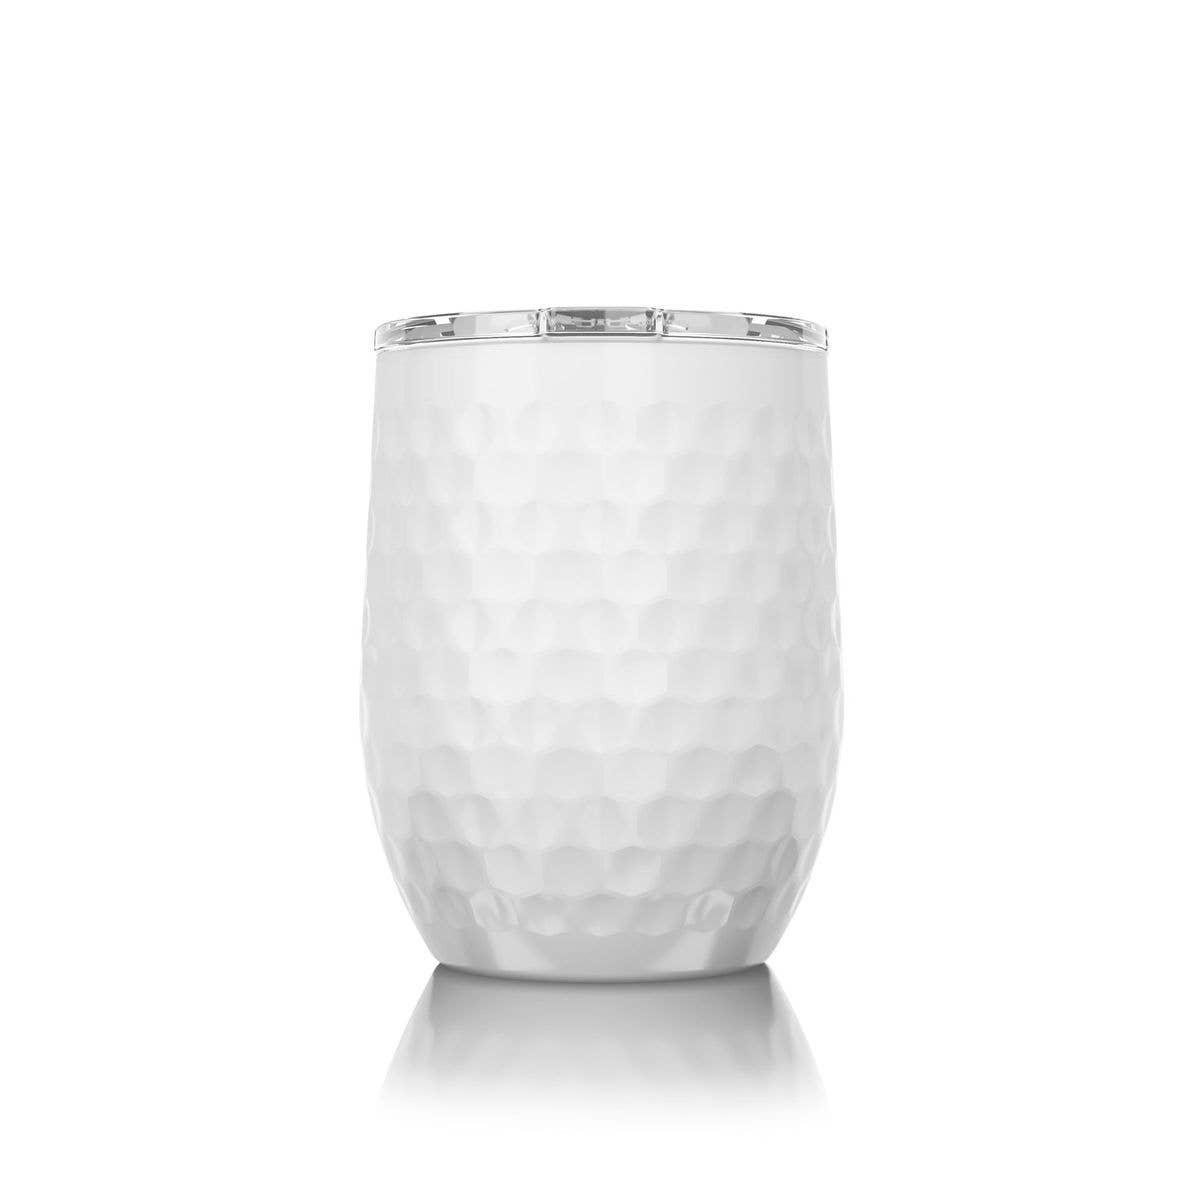 SIC Cups - 16 oz. Stemless Dimpled Golf